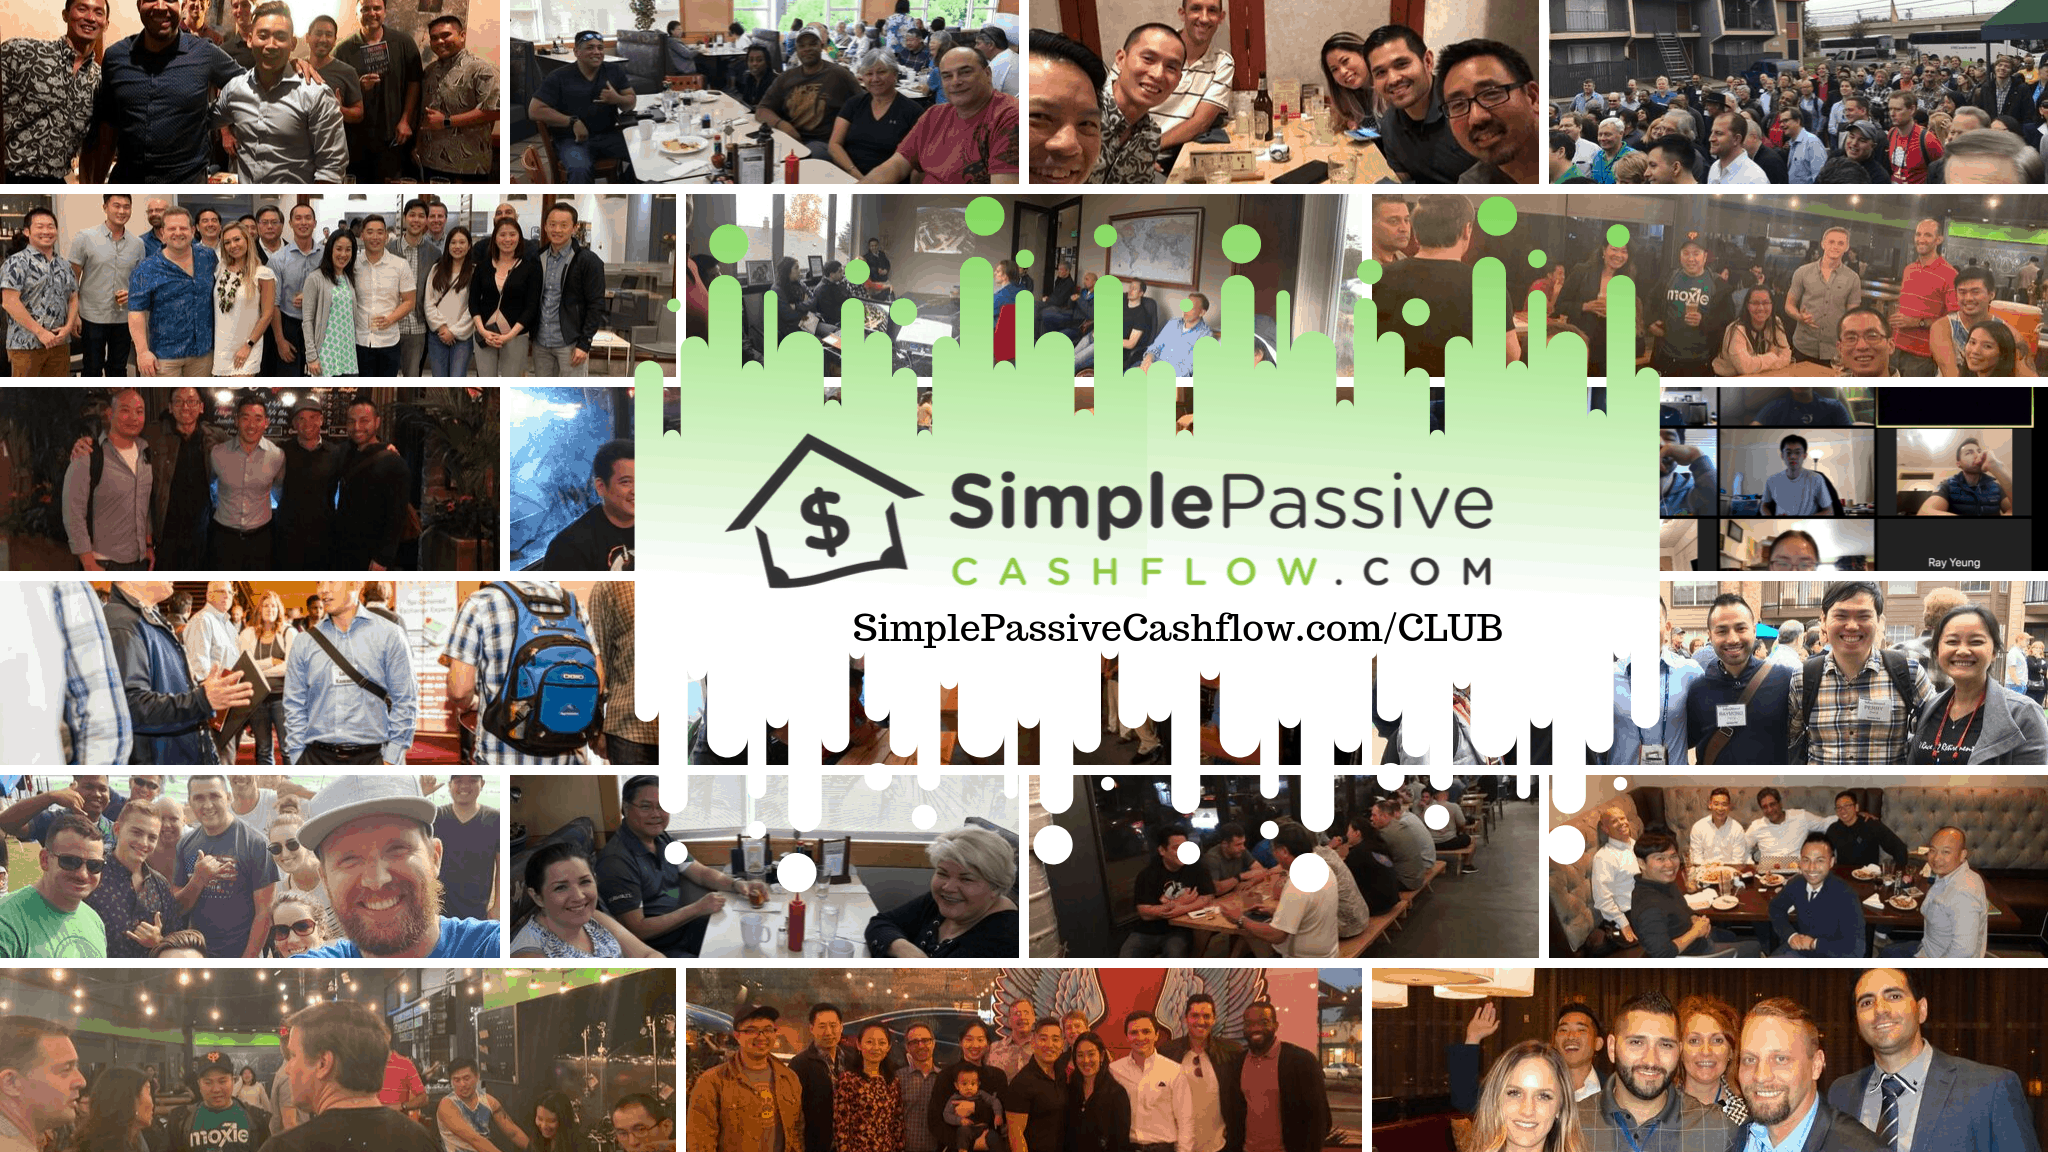 A collage showcasing various group gatherings and networking events organized by simplepassivecashflow.com, featuring people socializing, attending seminars, and enjoying group activities, all under the banner of developing passive income strategies and community building.